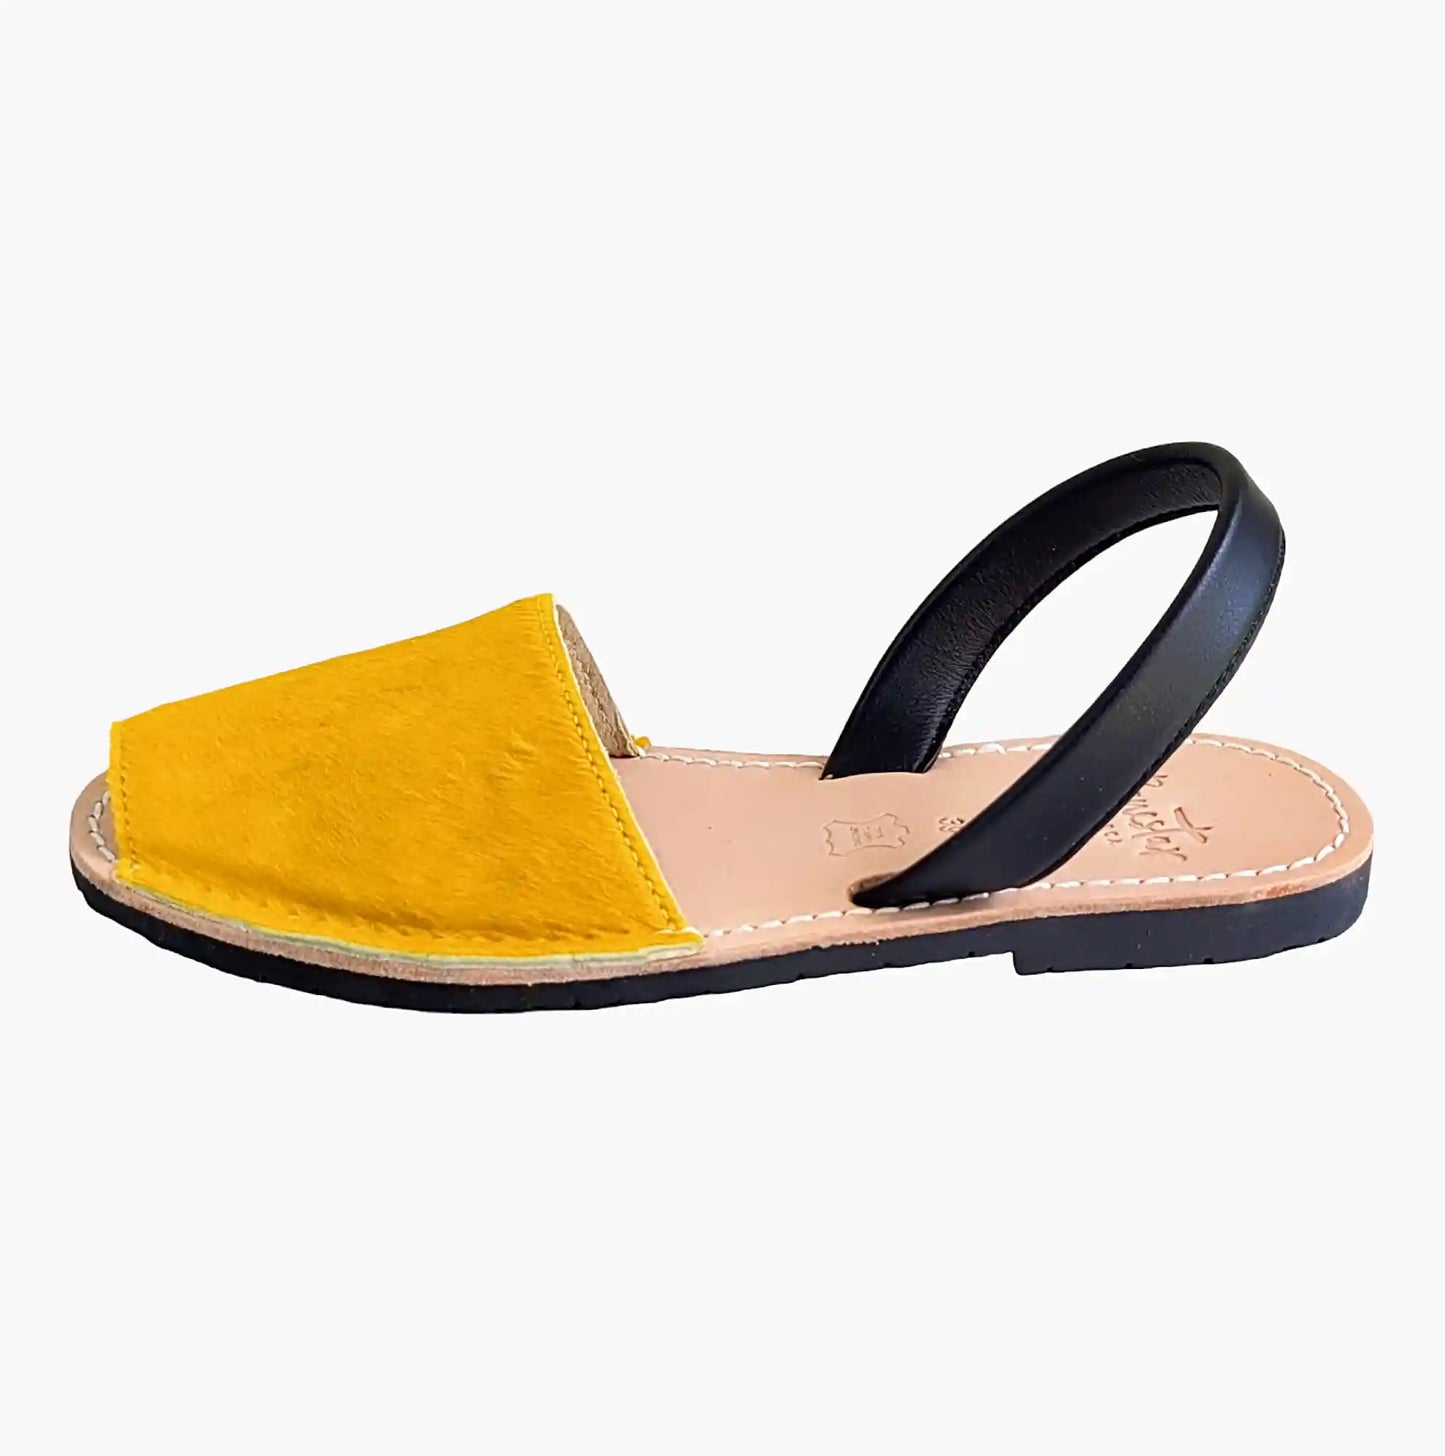 Avarcas-Yellow-Hide-Sandals-side-view